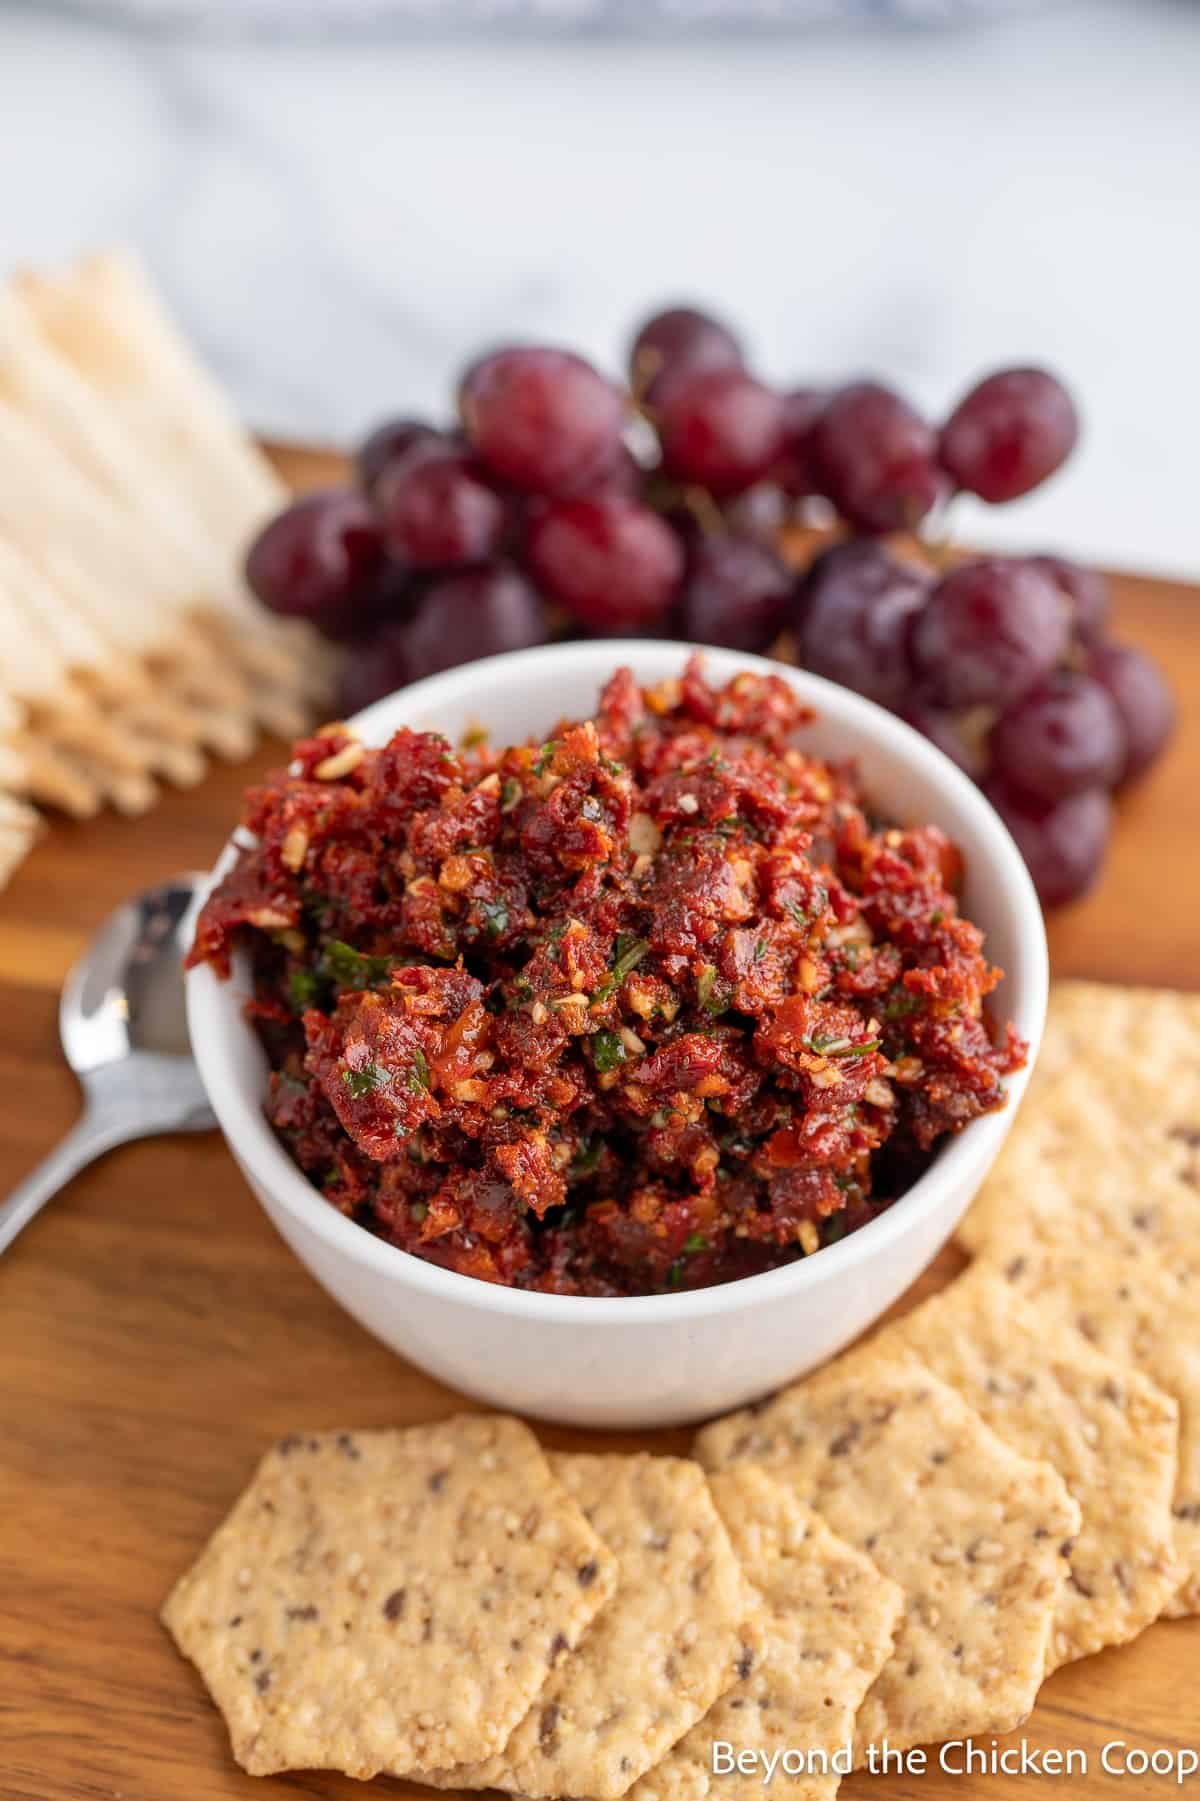 Chopped sun dried tomatoes in a bowl.